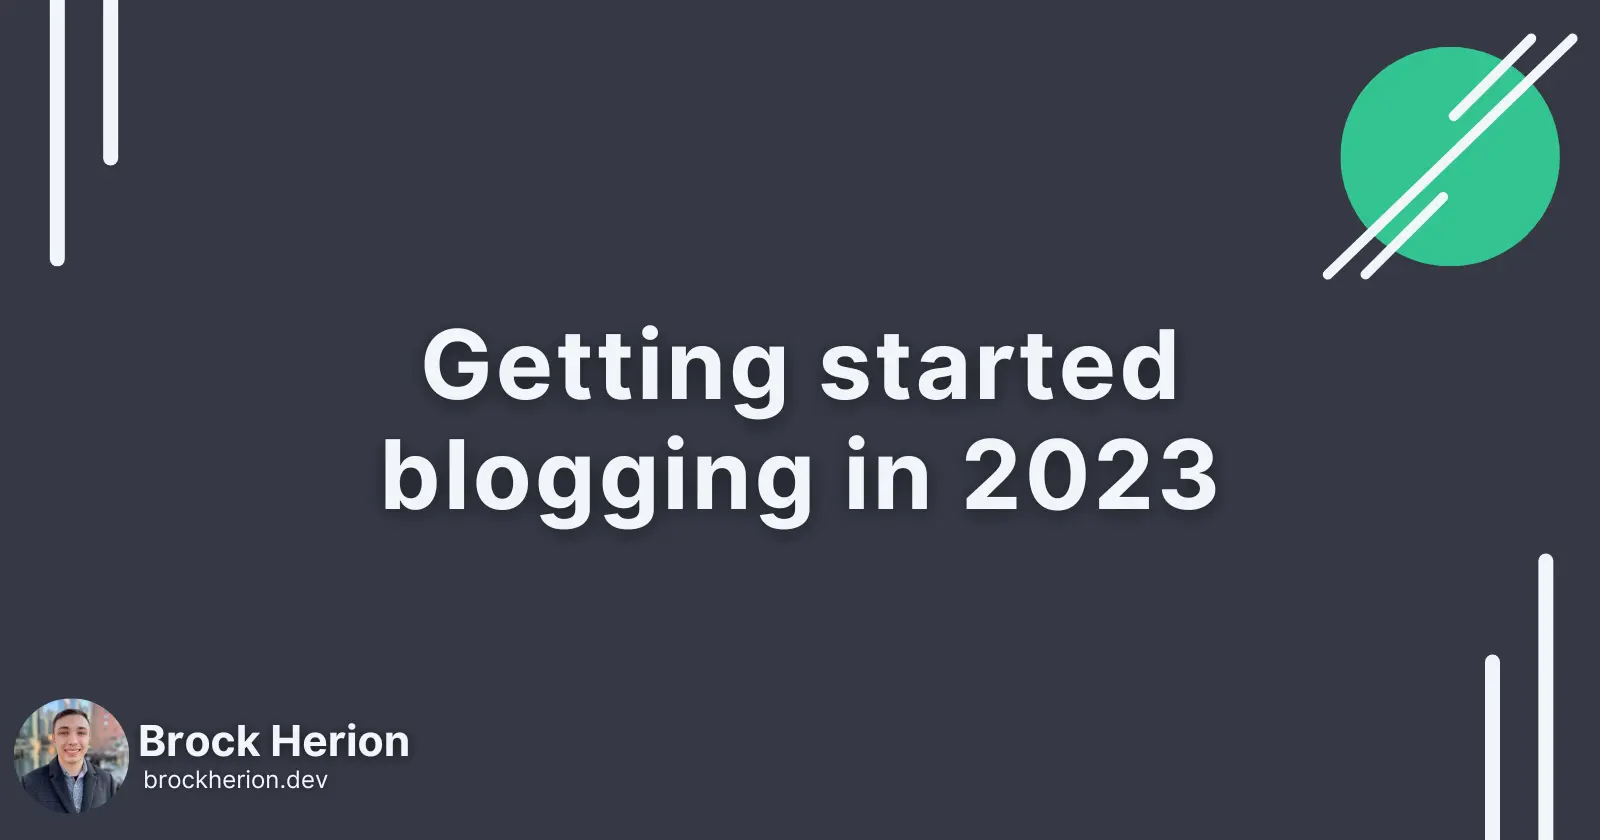 Getting started blogging in 2023